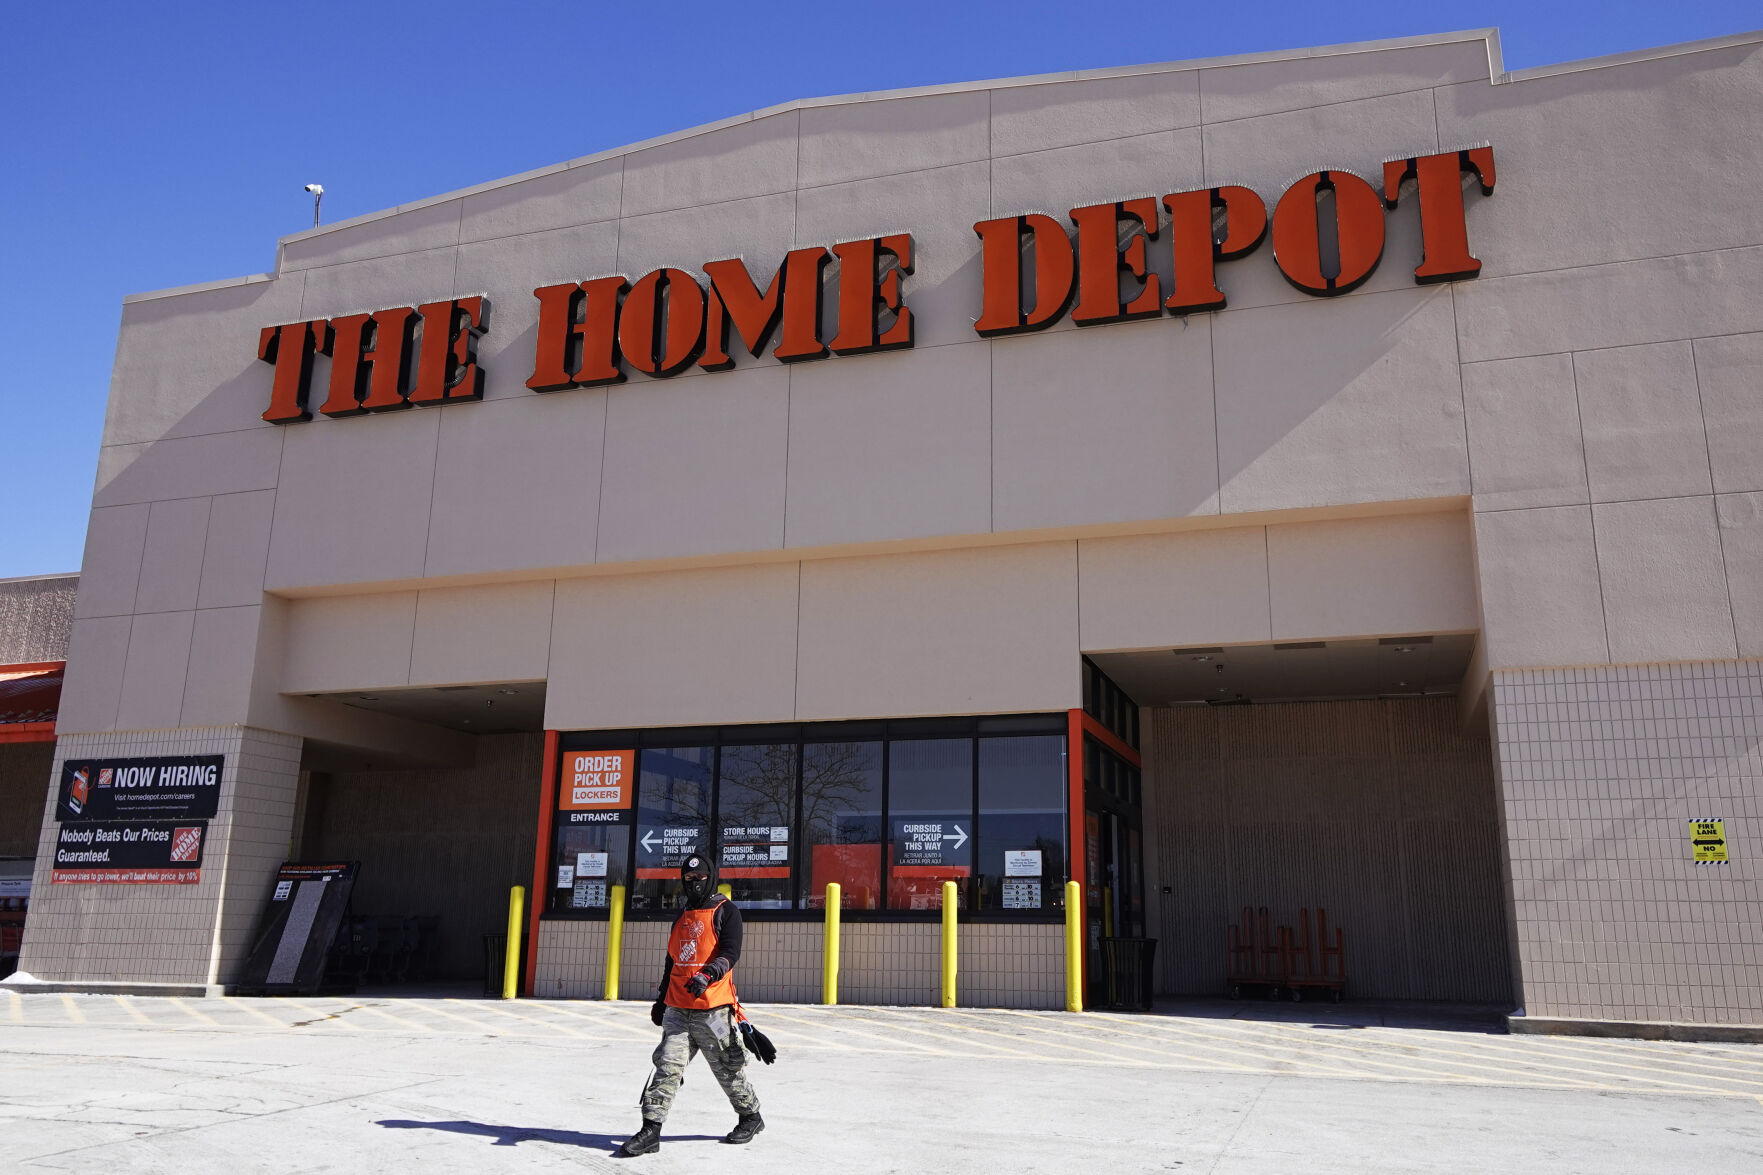 <p>FILE - A view of the exterior of the Home Depot improvement store, in Niles, Ill., Saturday, Feb. 19, 2022. Home Depot says it’s investing $1 billion in wage increases for its U.S. and Canadian hourly workers. The Atlanta-based home improvement chain said Tuesday, Feb. 21, 2023 that every hourly employee will get a raise starting this month. The investment will also ensure that starting pay is at least $15 per hour in all markets. (AP Photo/Nam Y. Huh, File)</p>   PHOTO CREDIT: Nam Y. Huh 